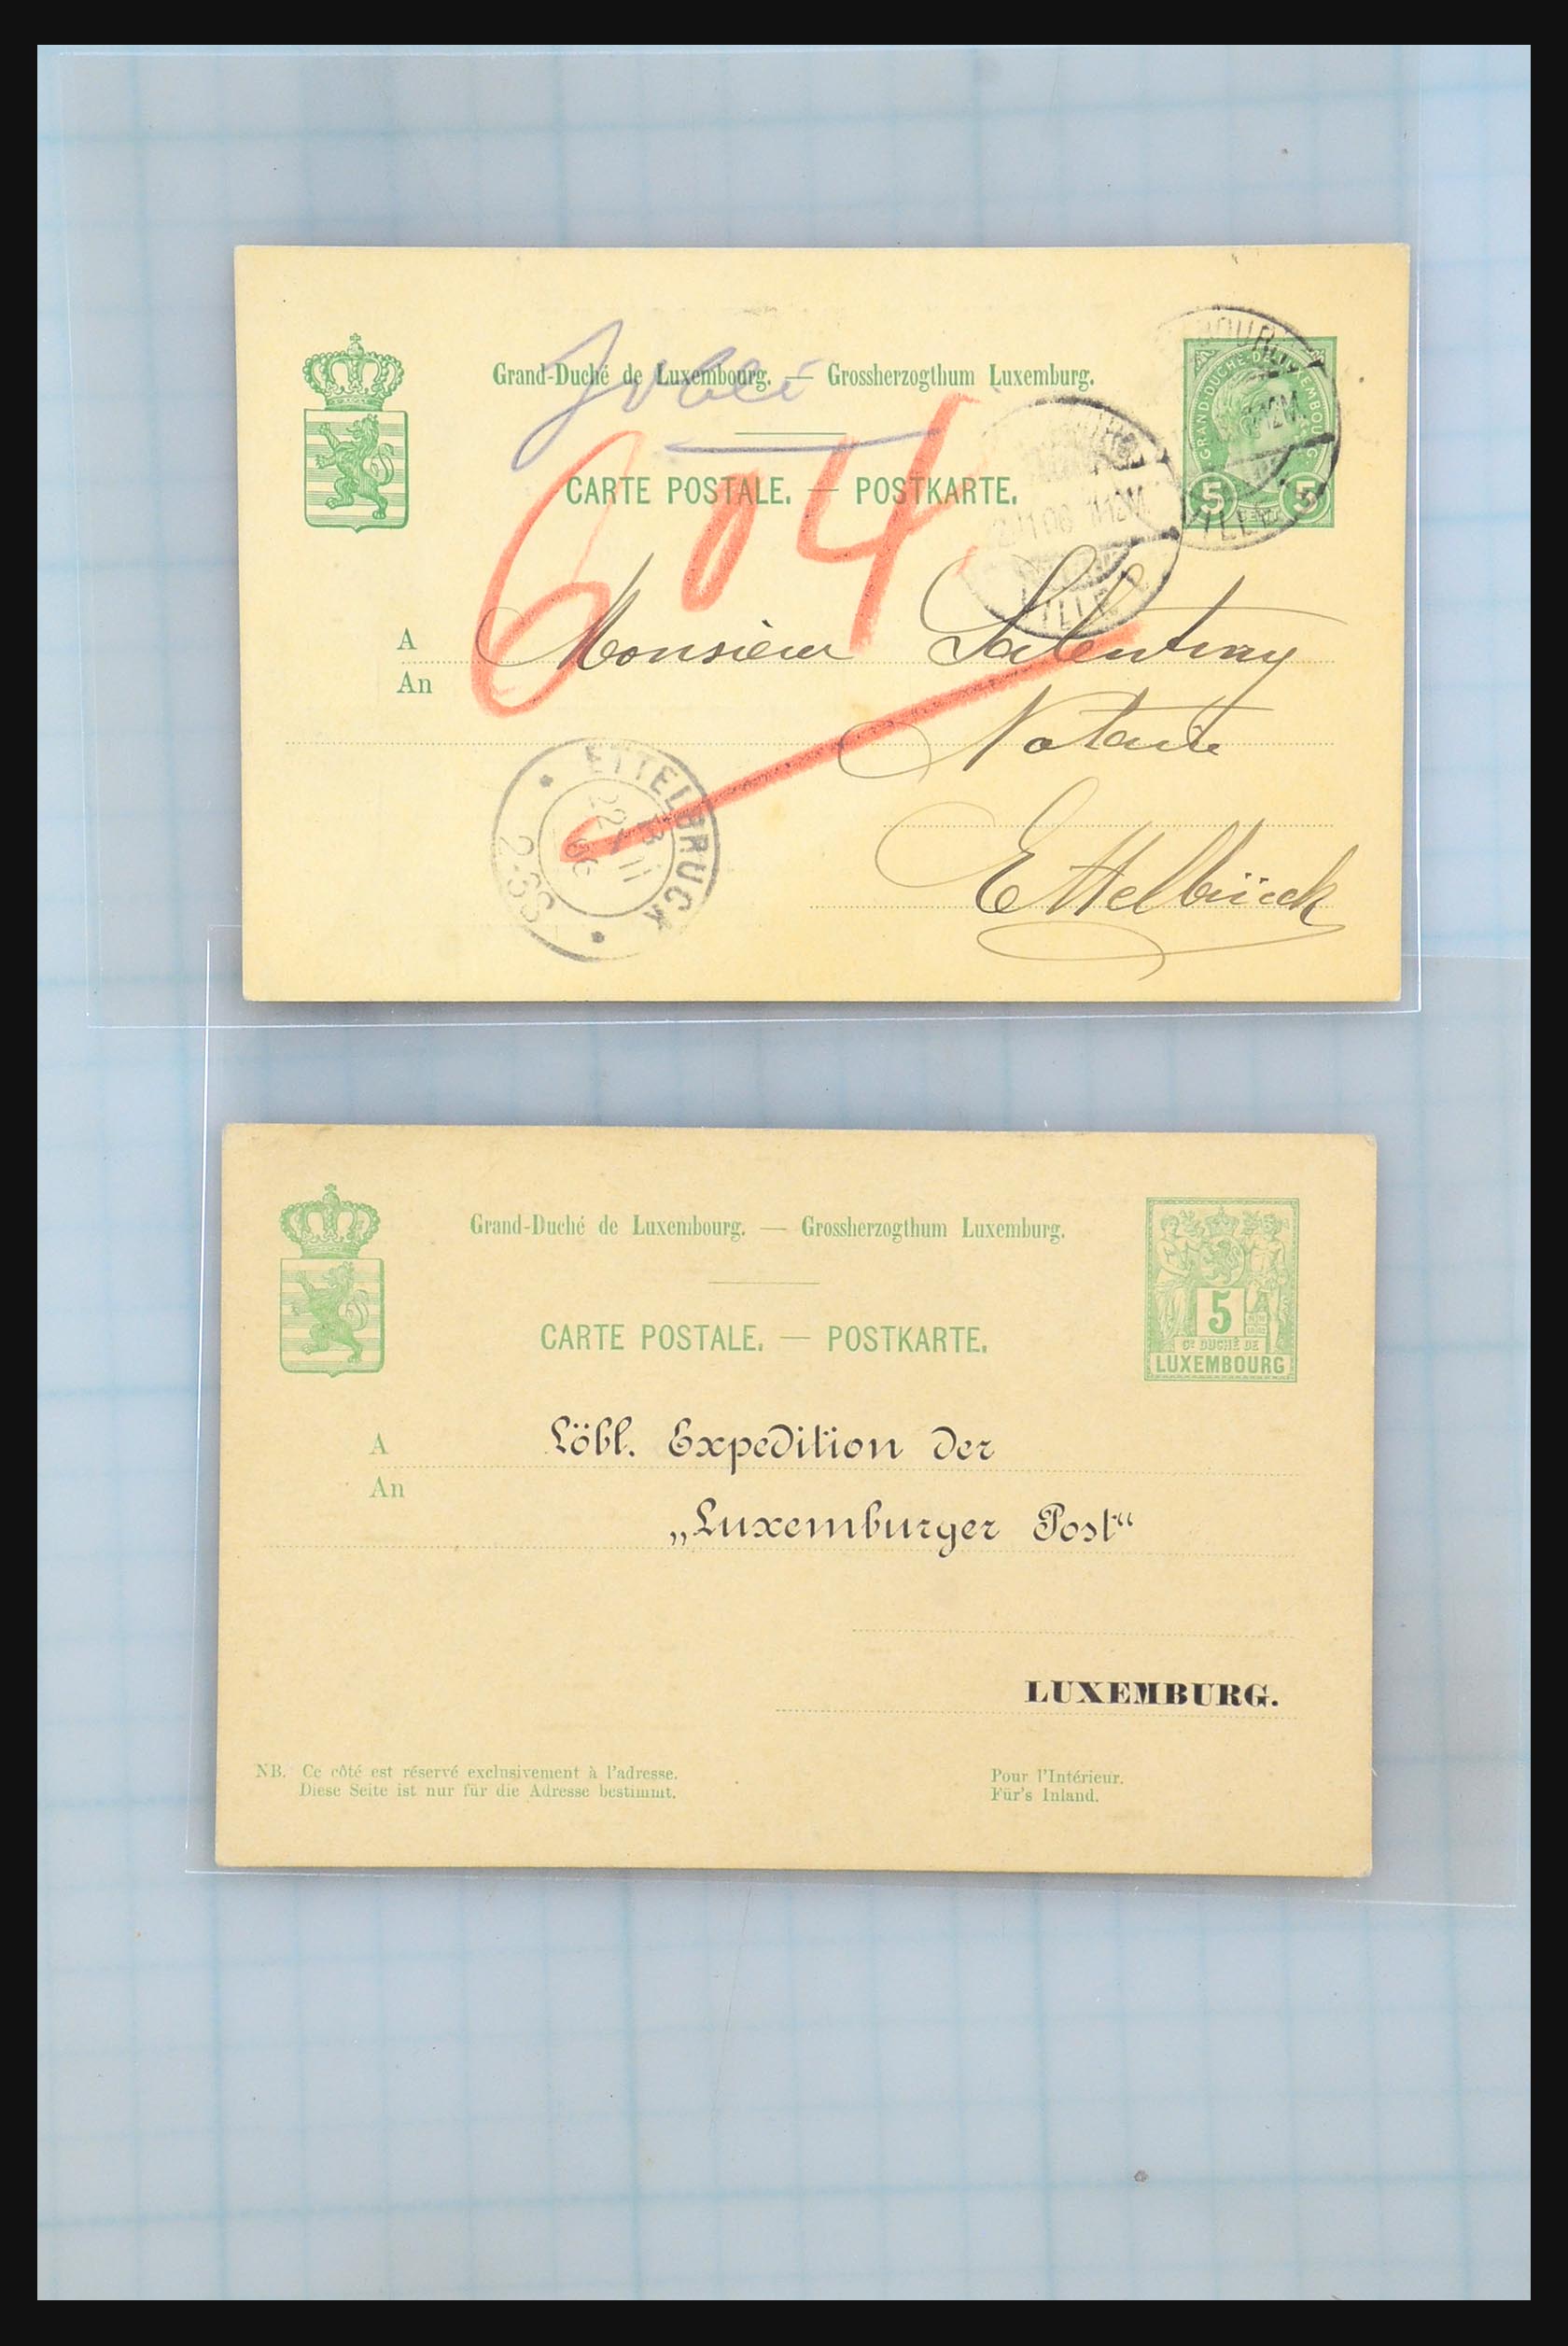 31358 061 - 31358 Portugal/Luxemburg/Greece covers 1880-1960.